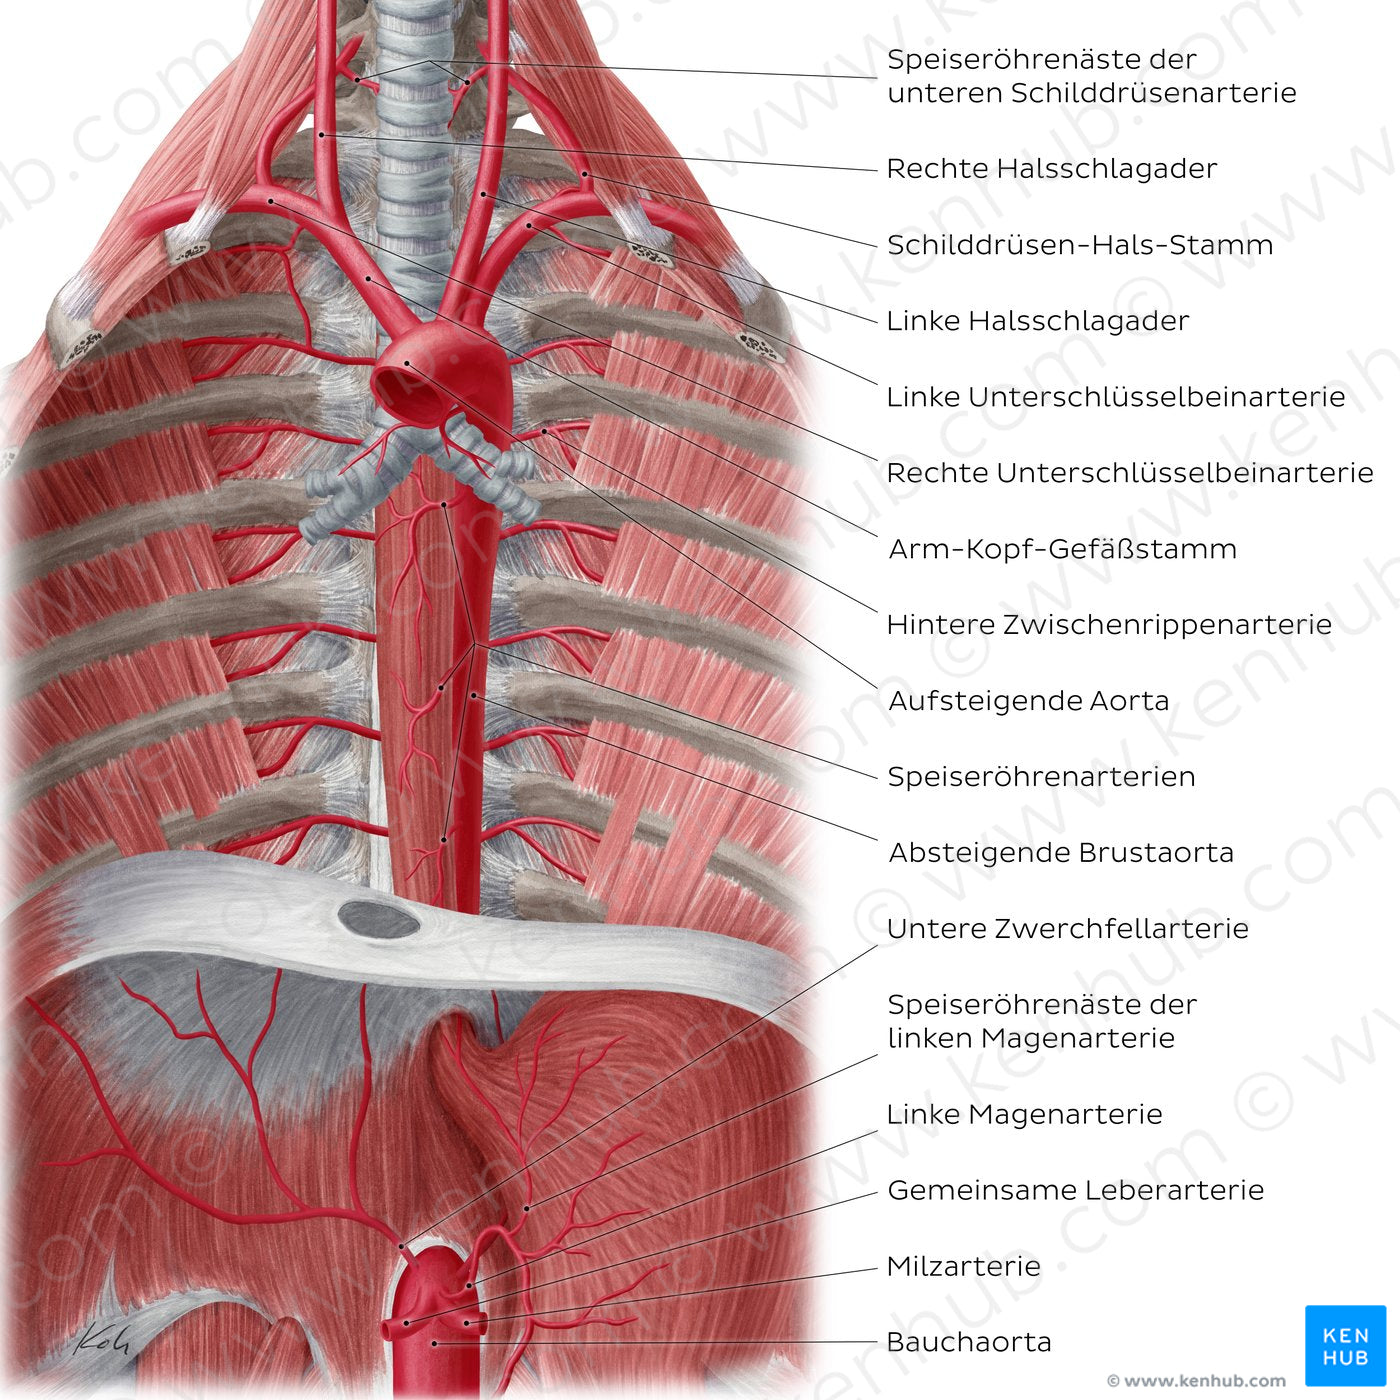 Arteries of the posterior thoracic wall (German)